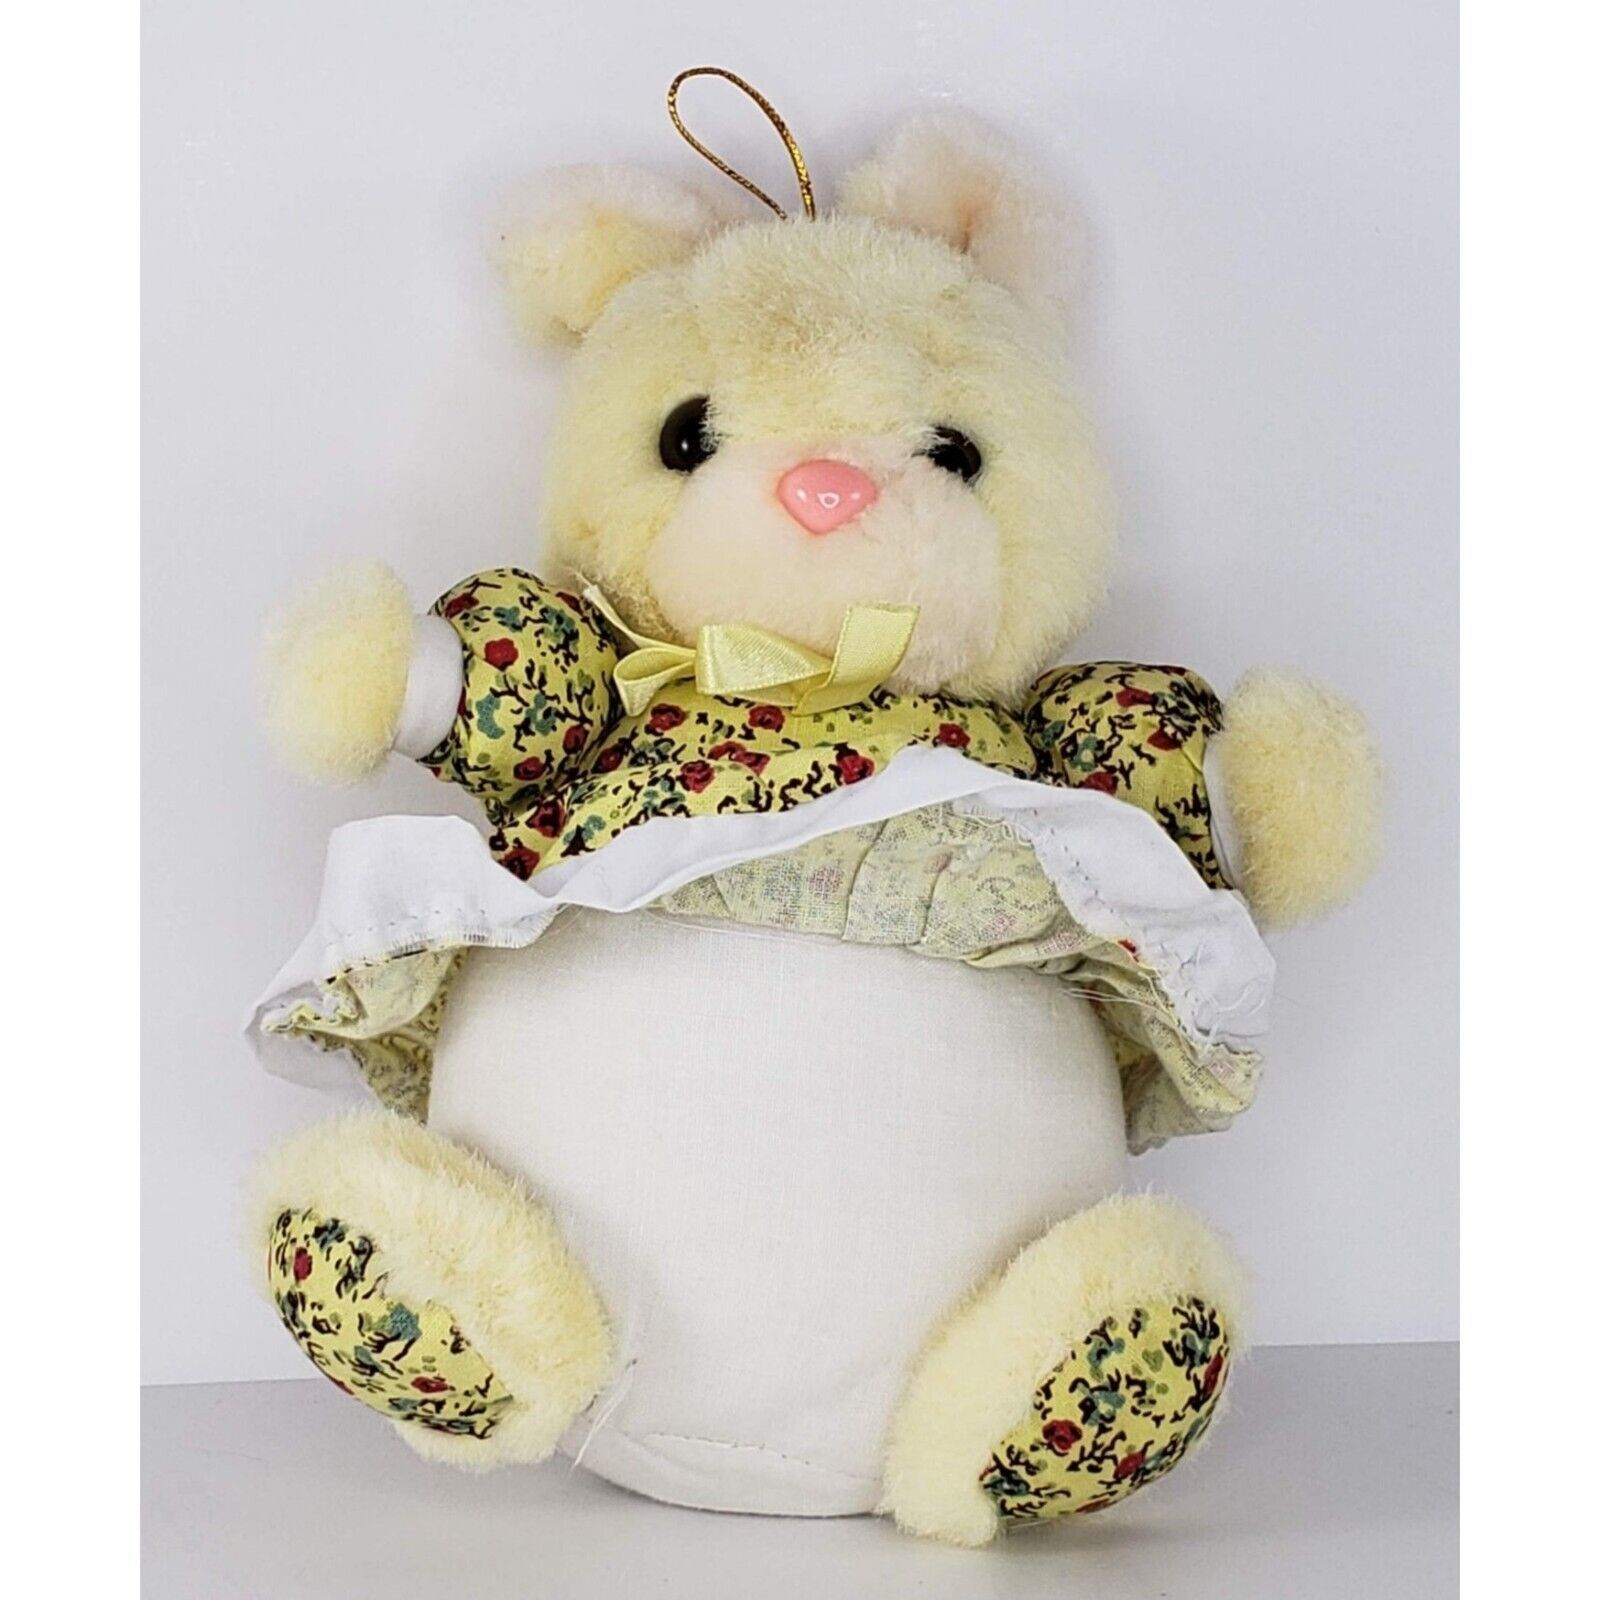 Primary image for Vintage Cloud 9 Easter Bunny Rabbit Plush Stuffed Animal Yellow Floral Dress